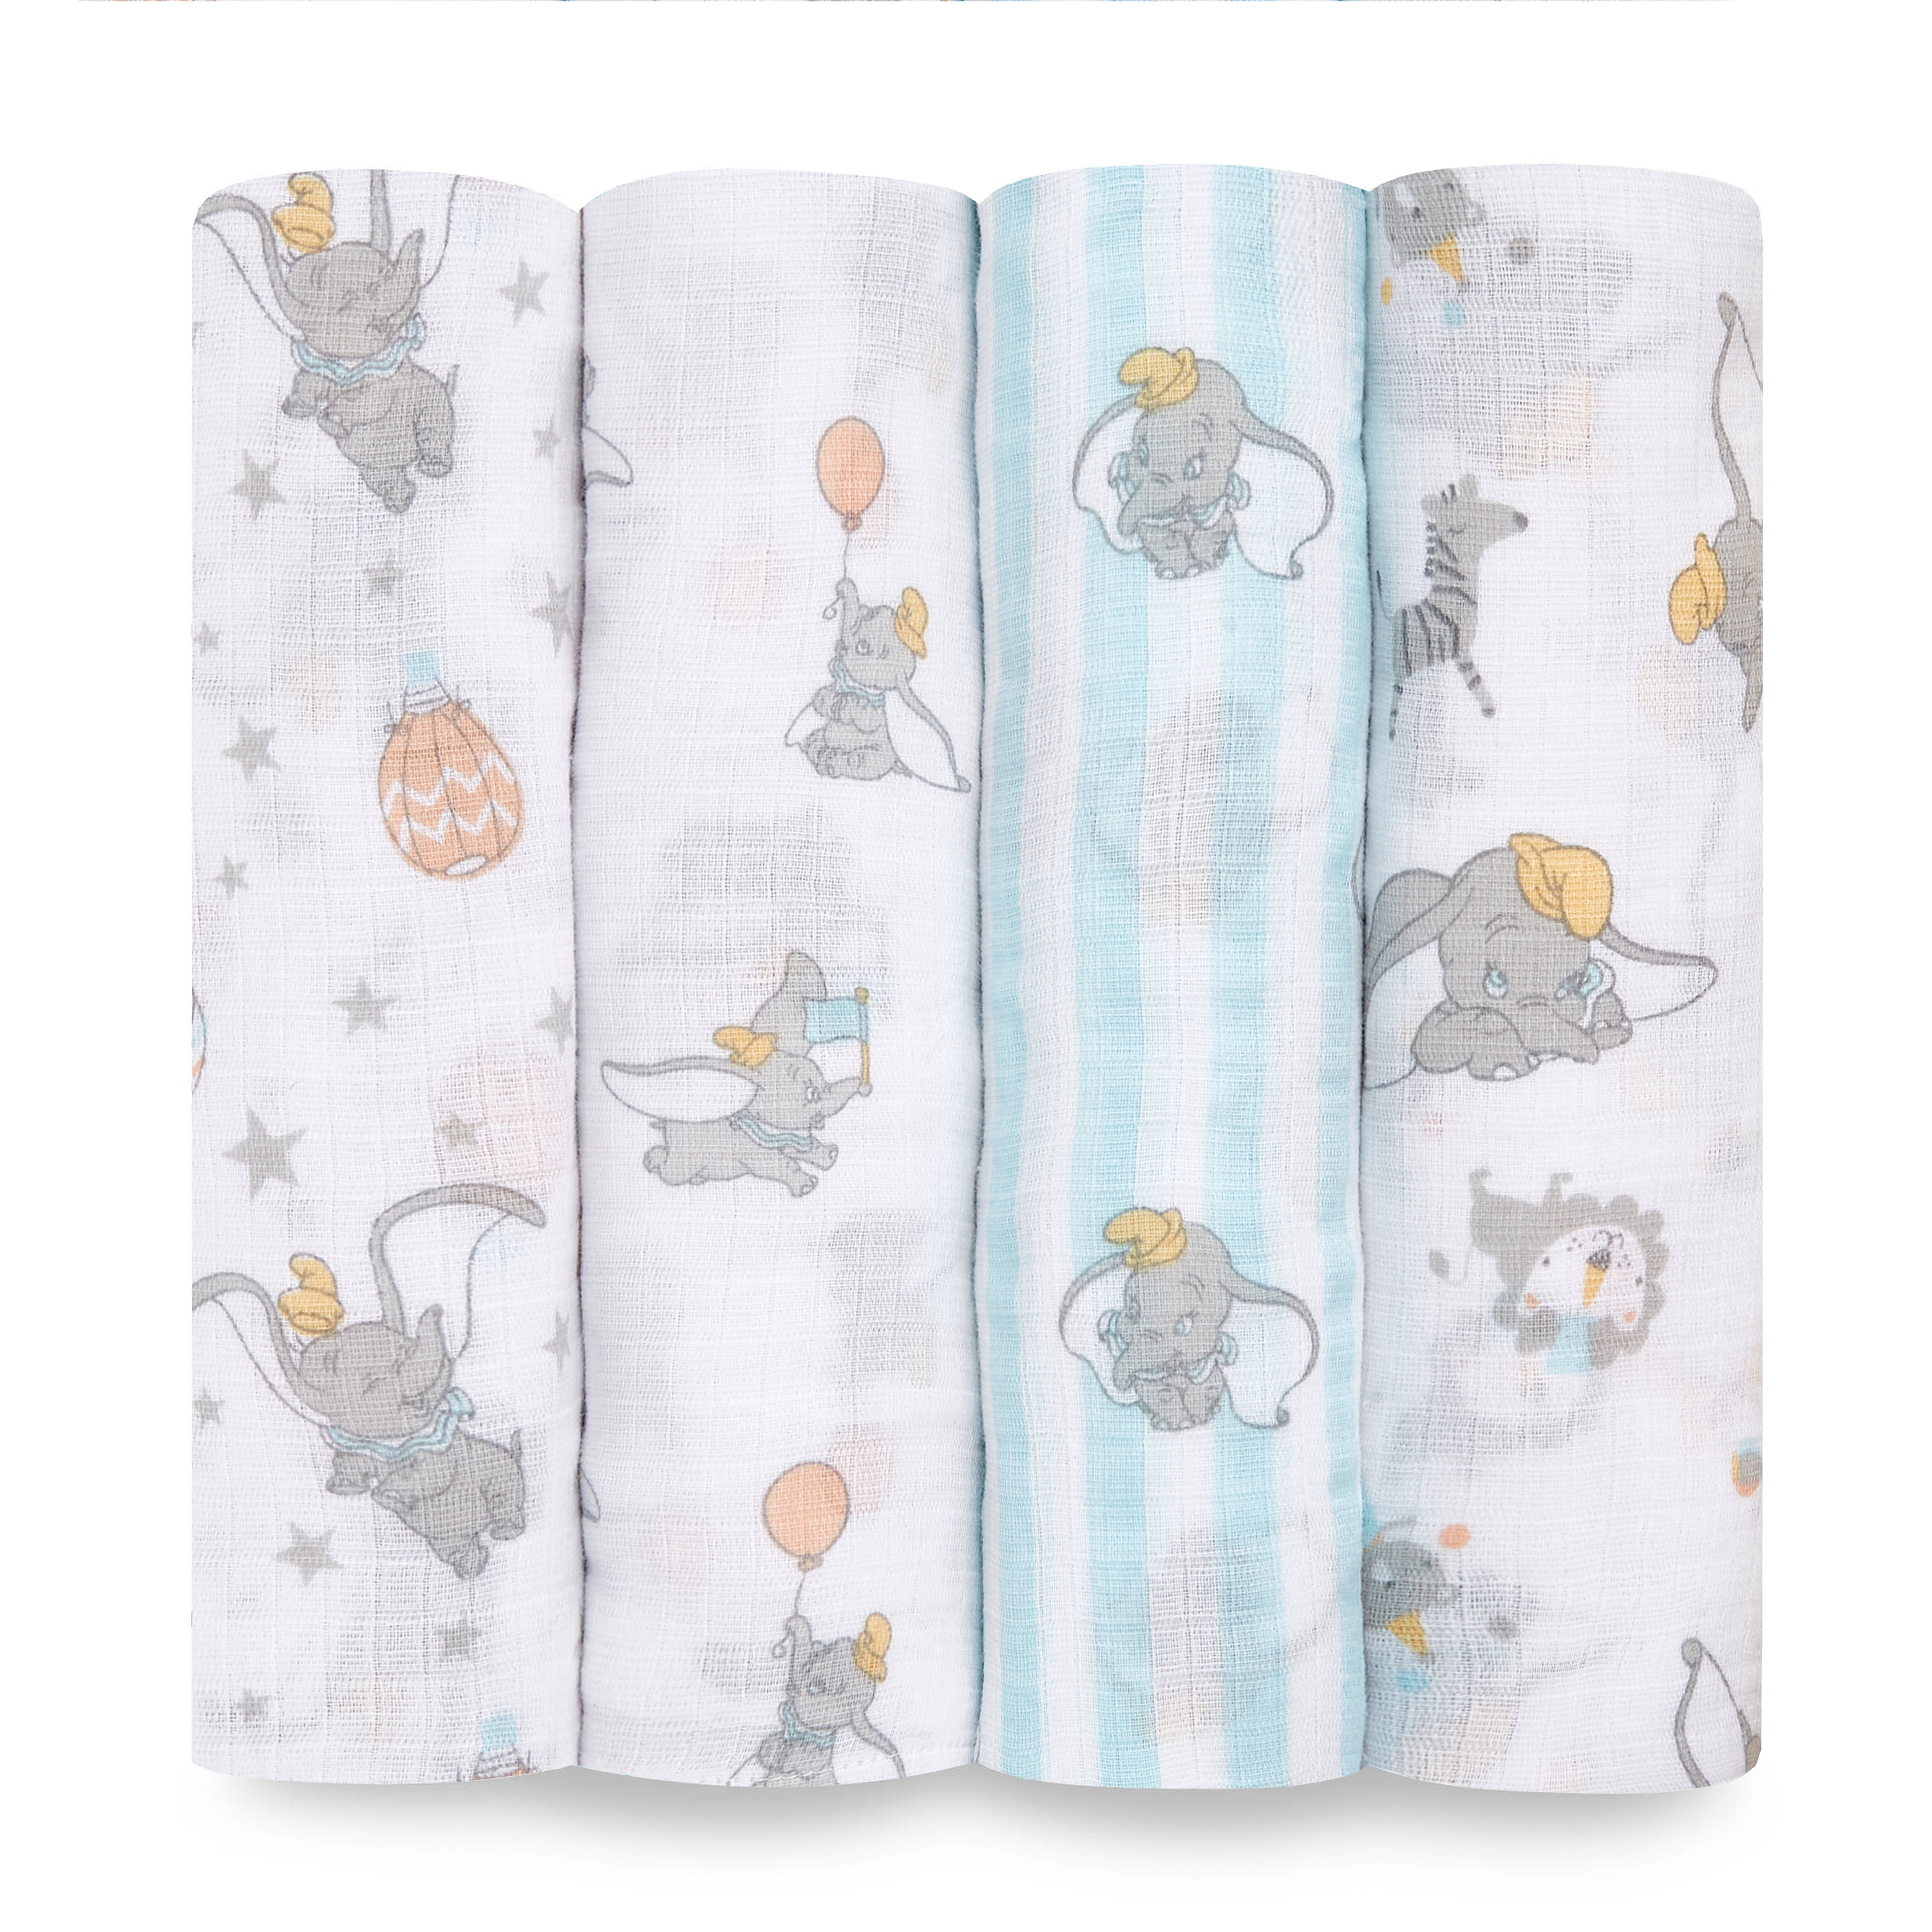 Anais Swaddleplus Multi-Use Muslin Swaddle Baby Blankets Pack of 4 NEW Aden 